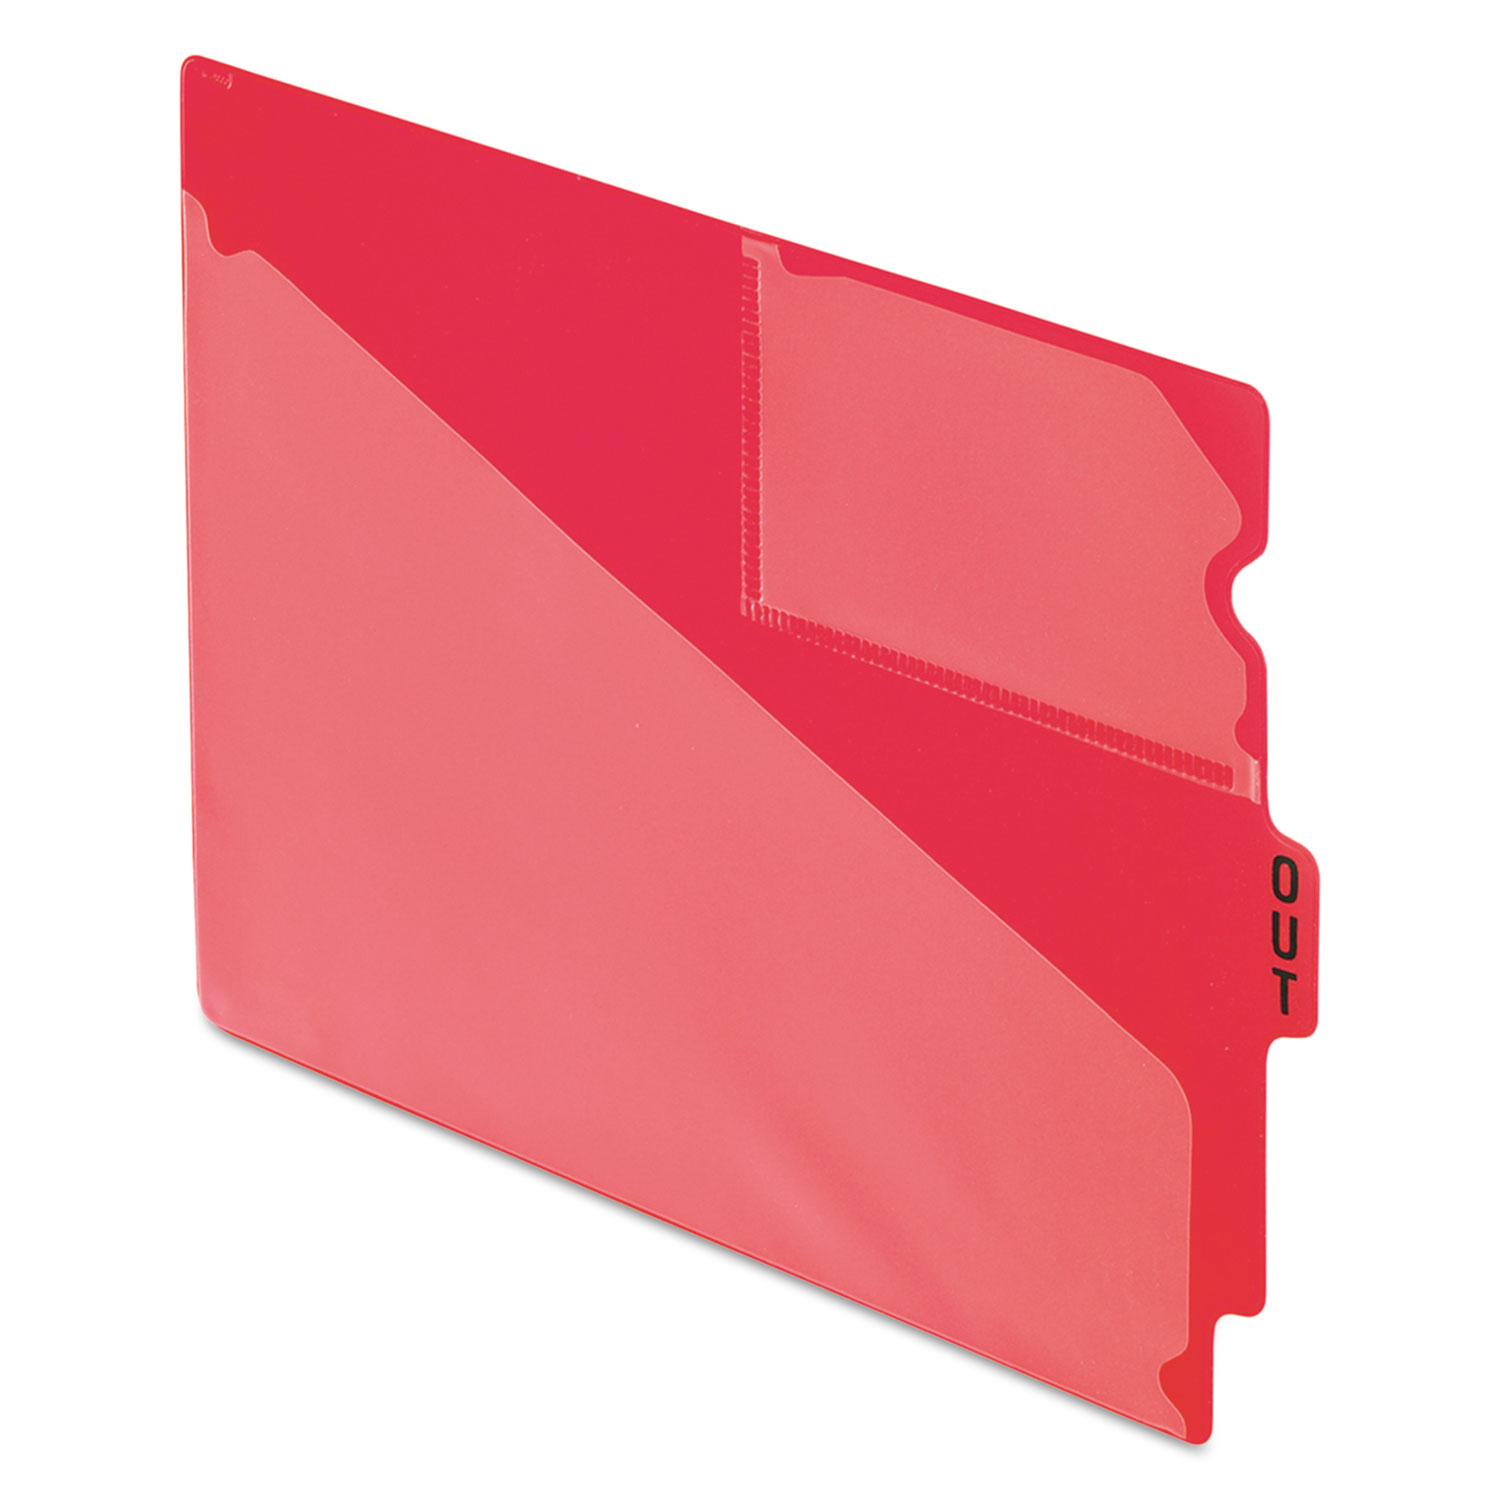  Pendaflex 13541 Colored Poly Out Guides with Center Tab, 1/3-Cut End Tab, Out, 8.5 x 11, Red, 50/Box (PFX13541) 